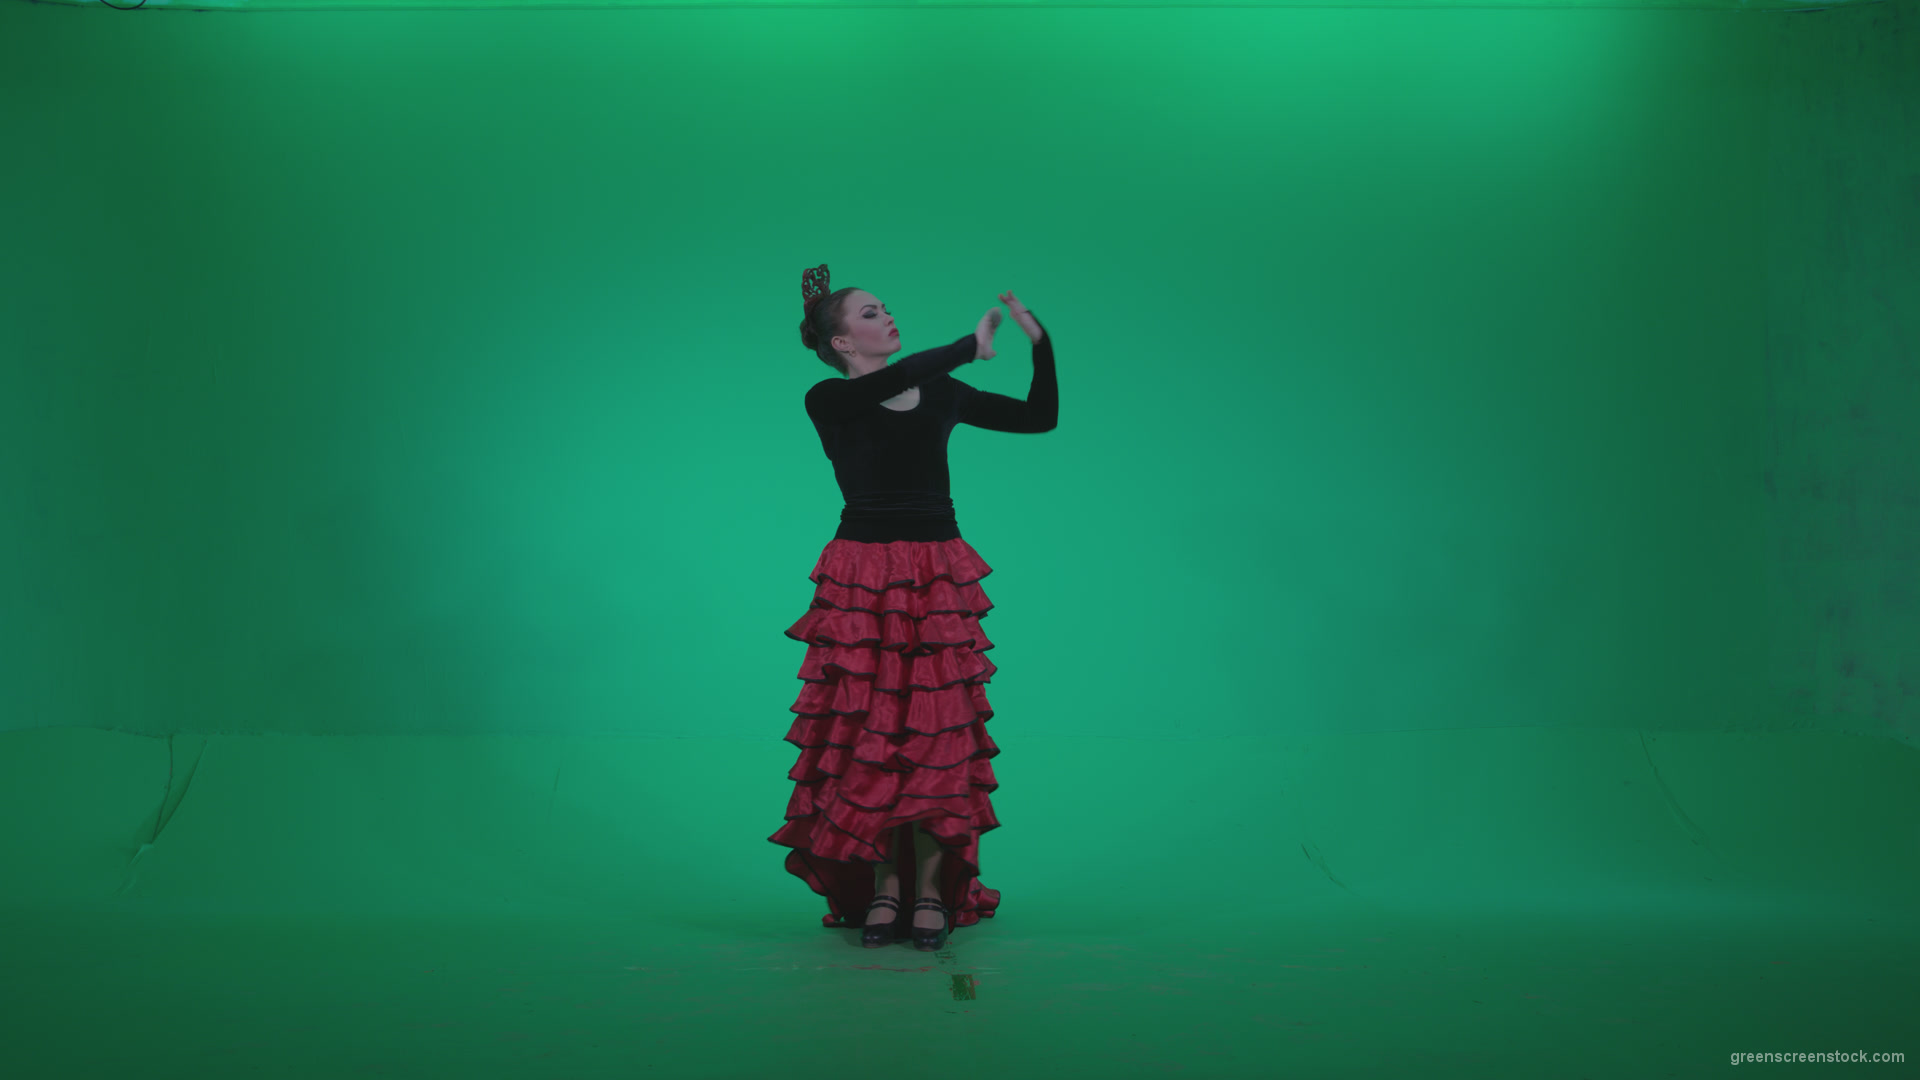 Flamenco-Red-and-Black-Dress-rb9-Green-Screen-Video-Footage_004 Green Screen Stock